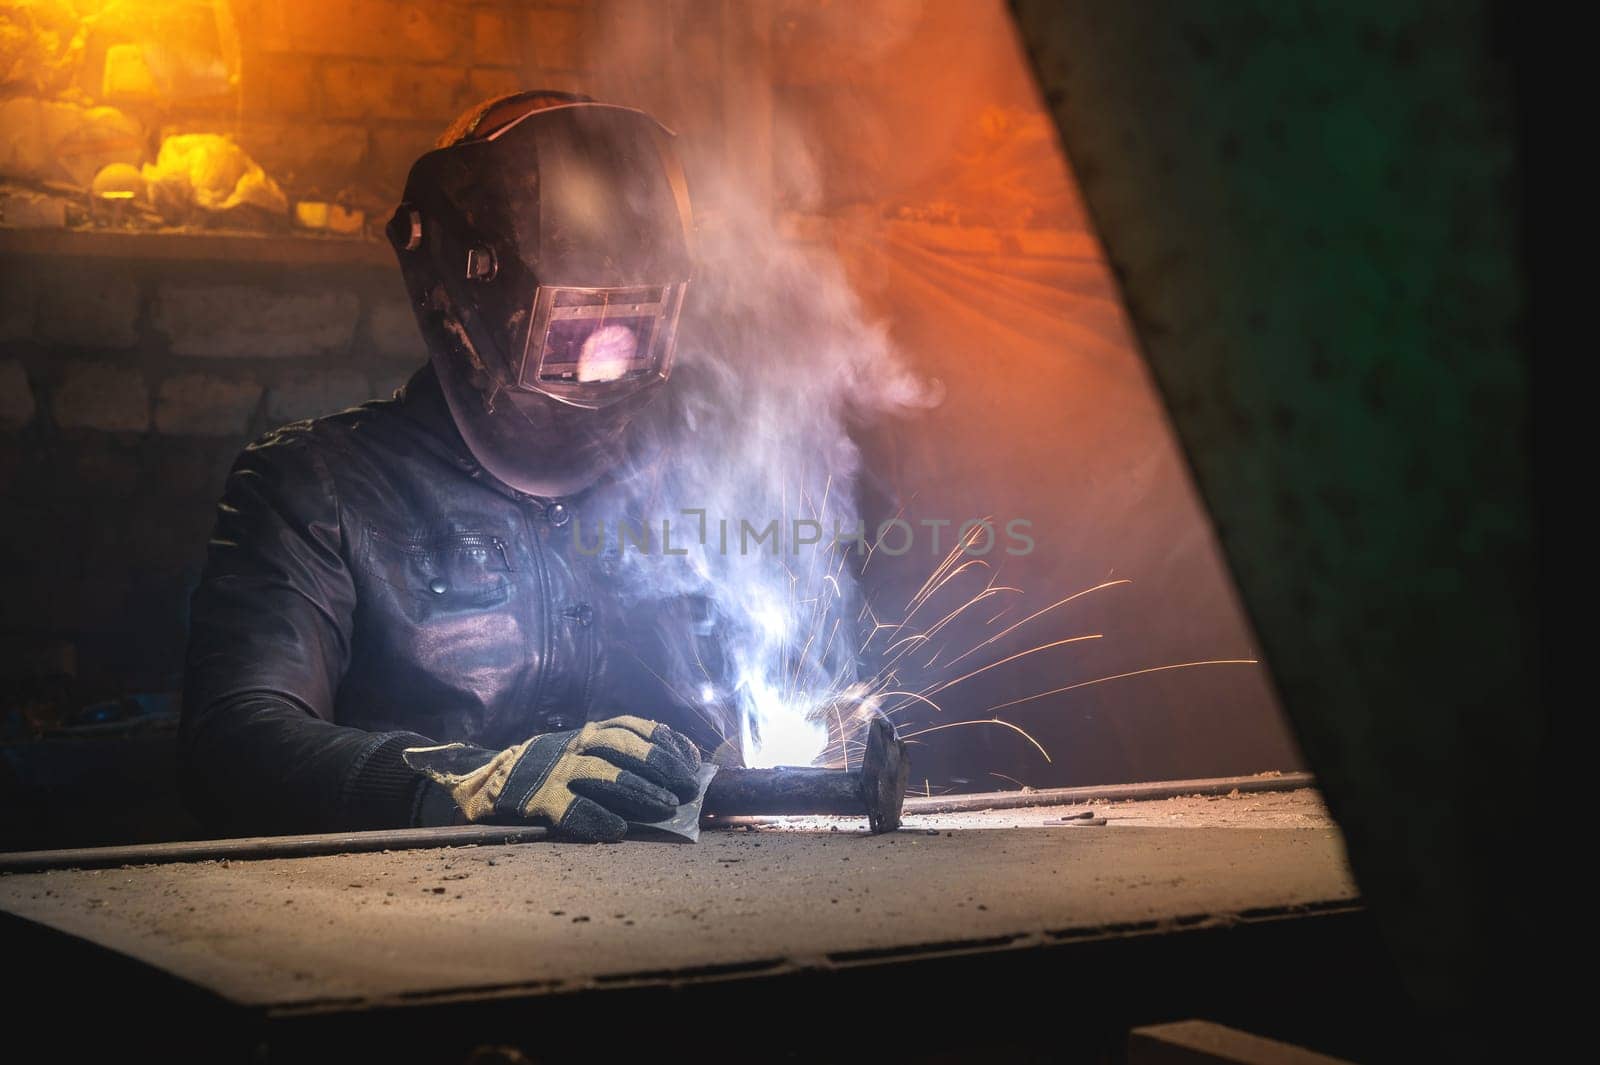 A welder wearing a mask and eye protection welds a part on a pipe. Close-up of an old trowel and individual work.